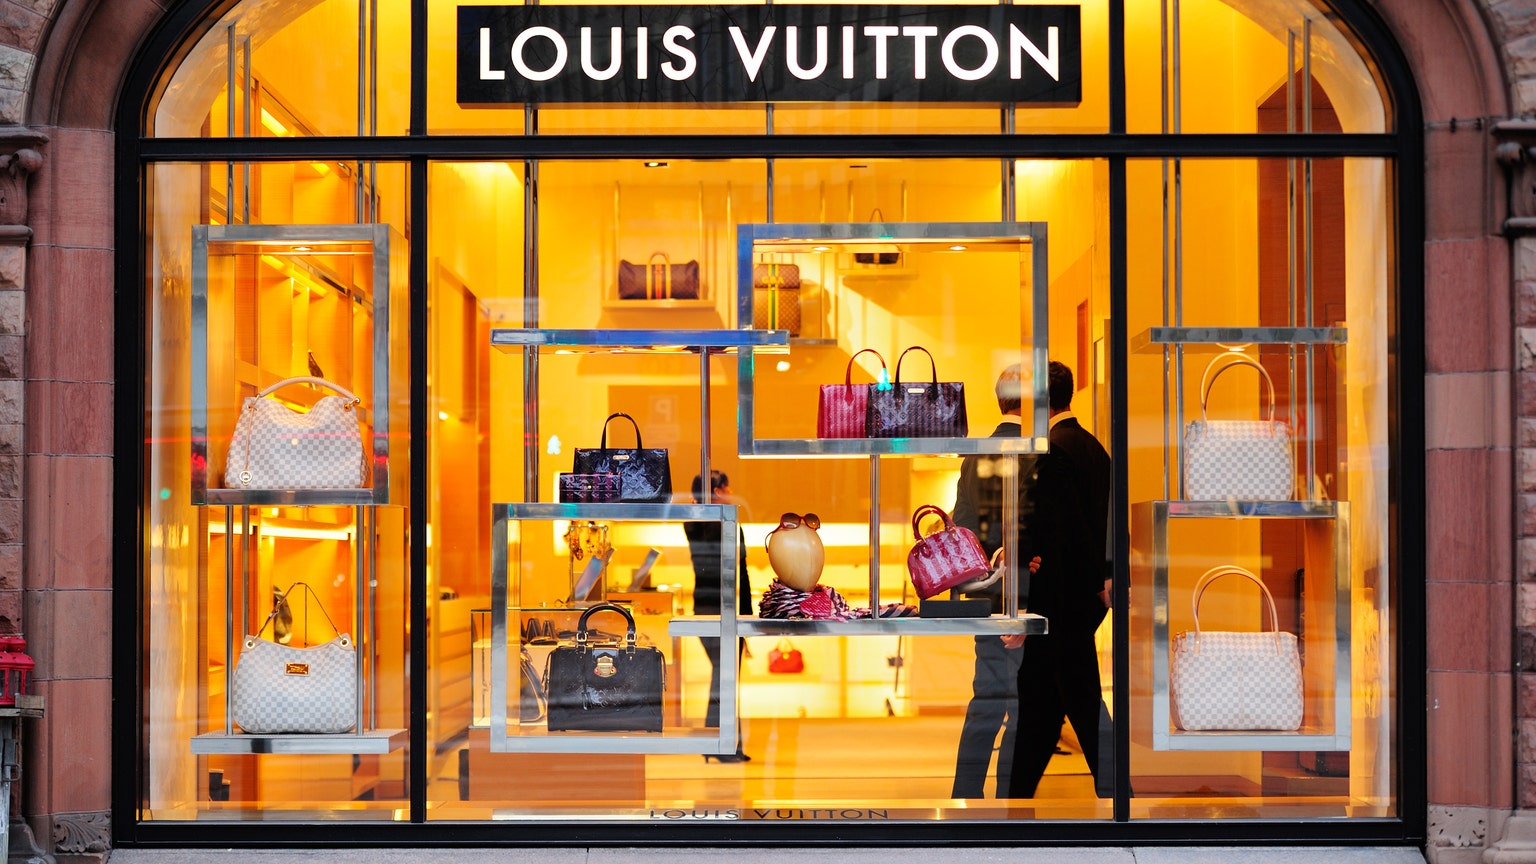 DFS sees 'continued decline' in revenue as LVMH rebounds